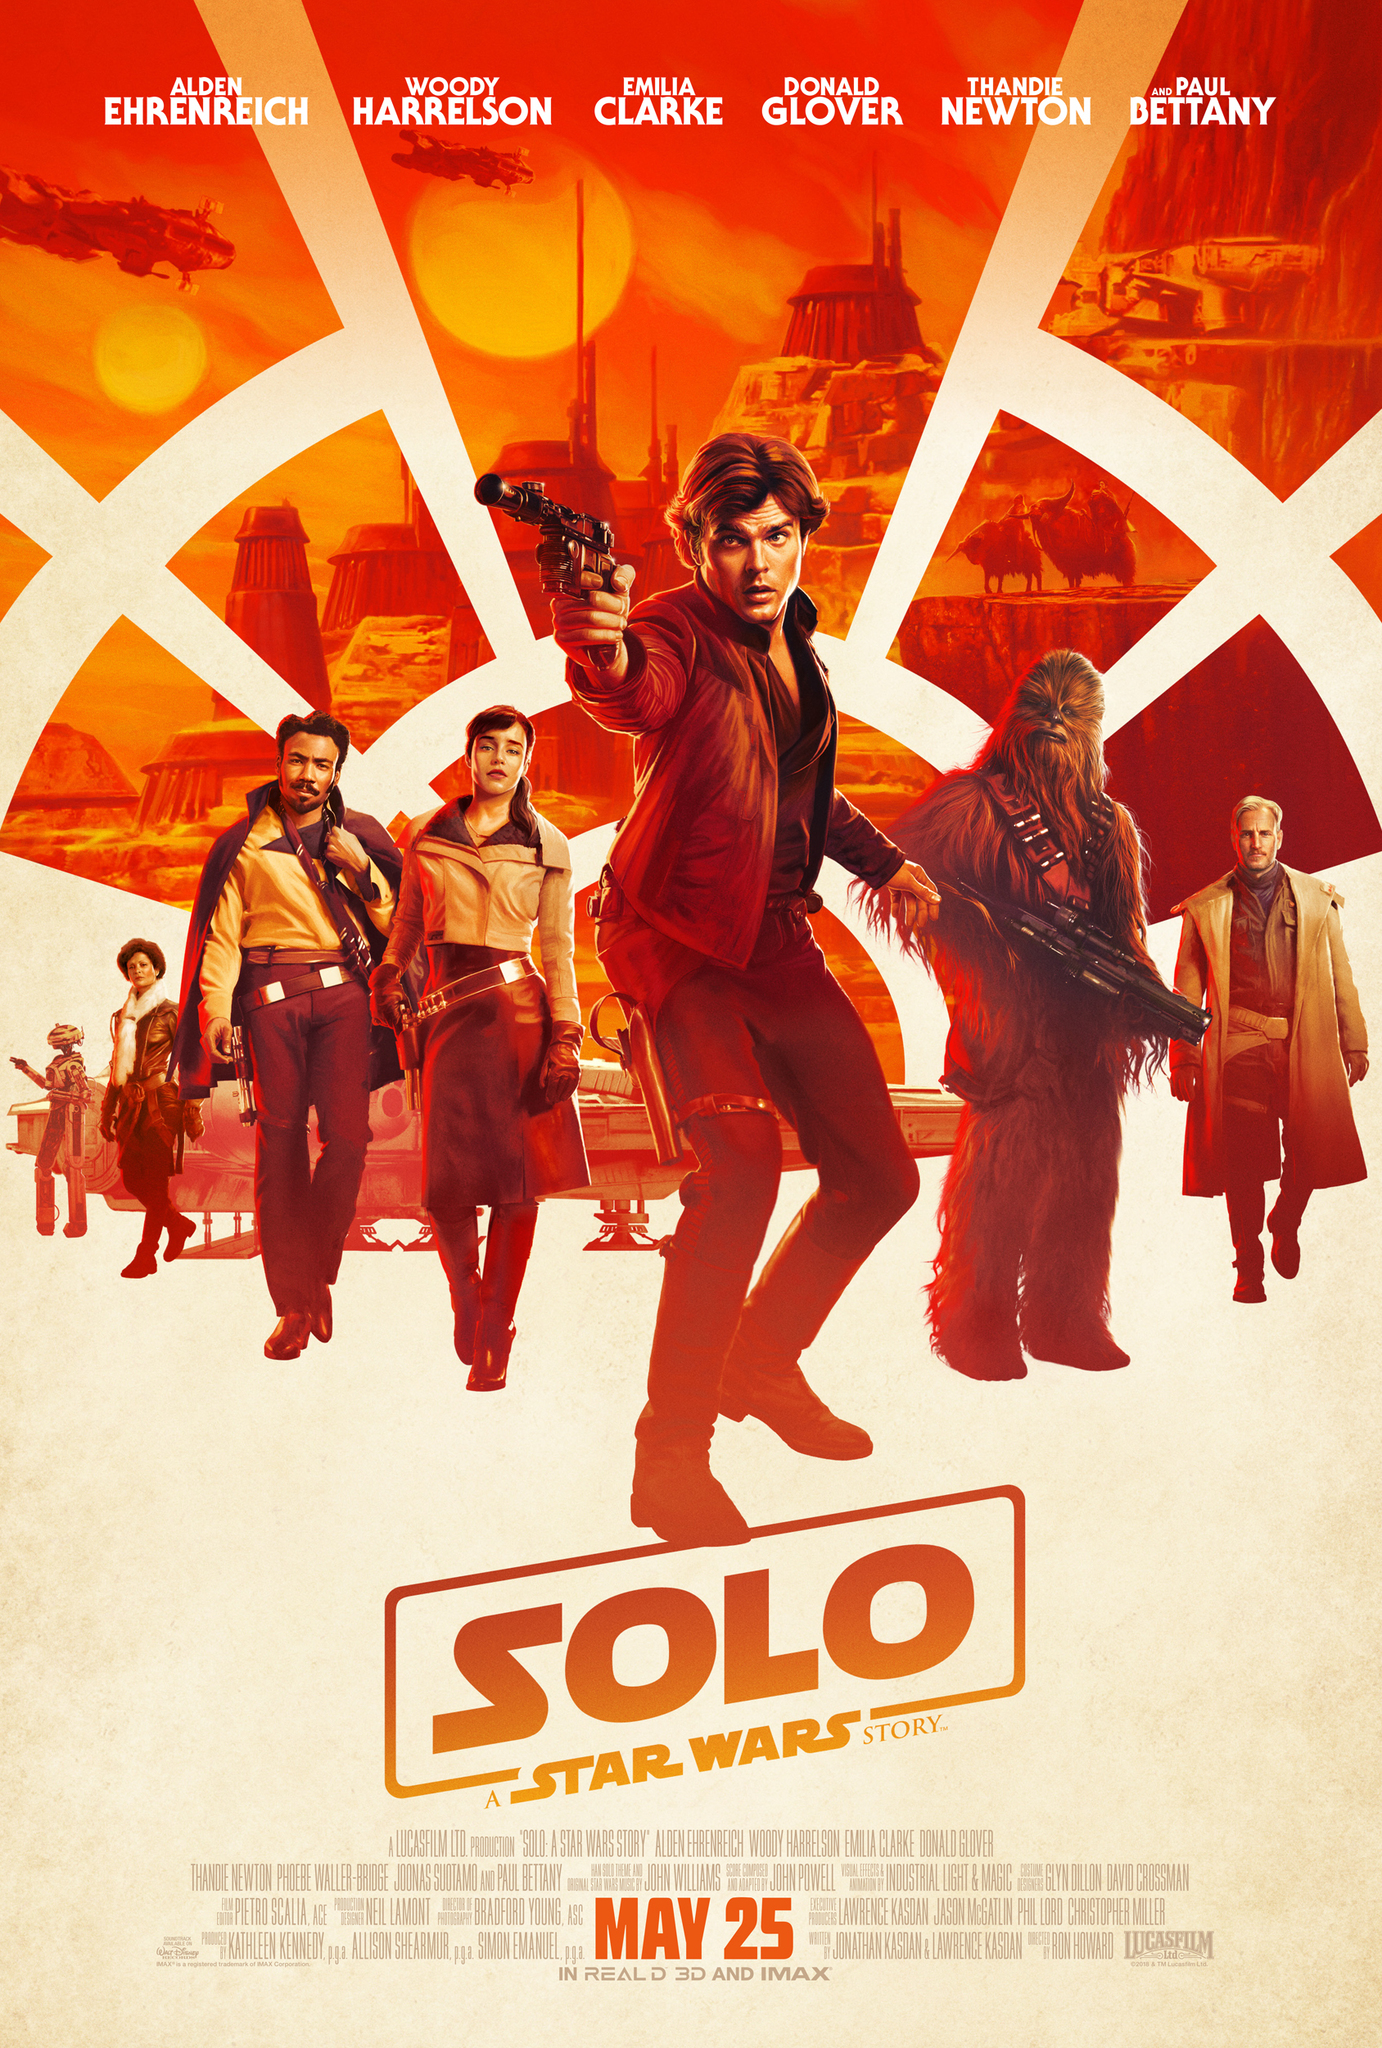 Solo Movie Background Music Download